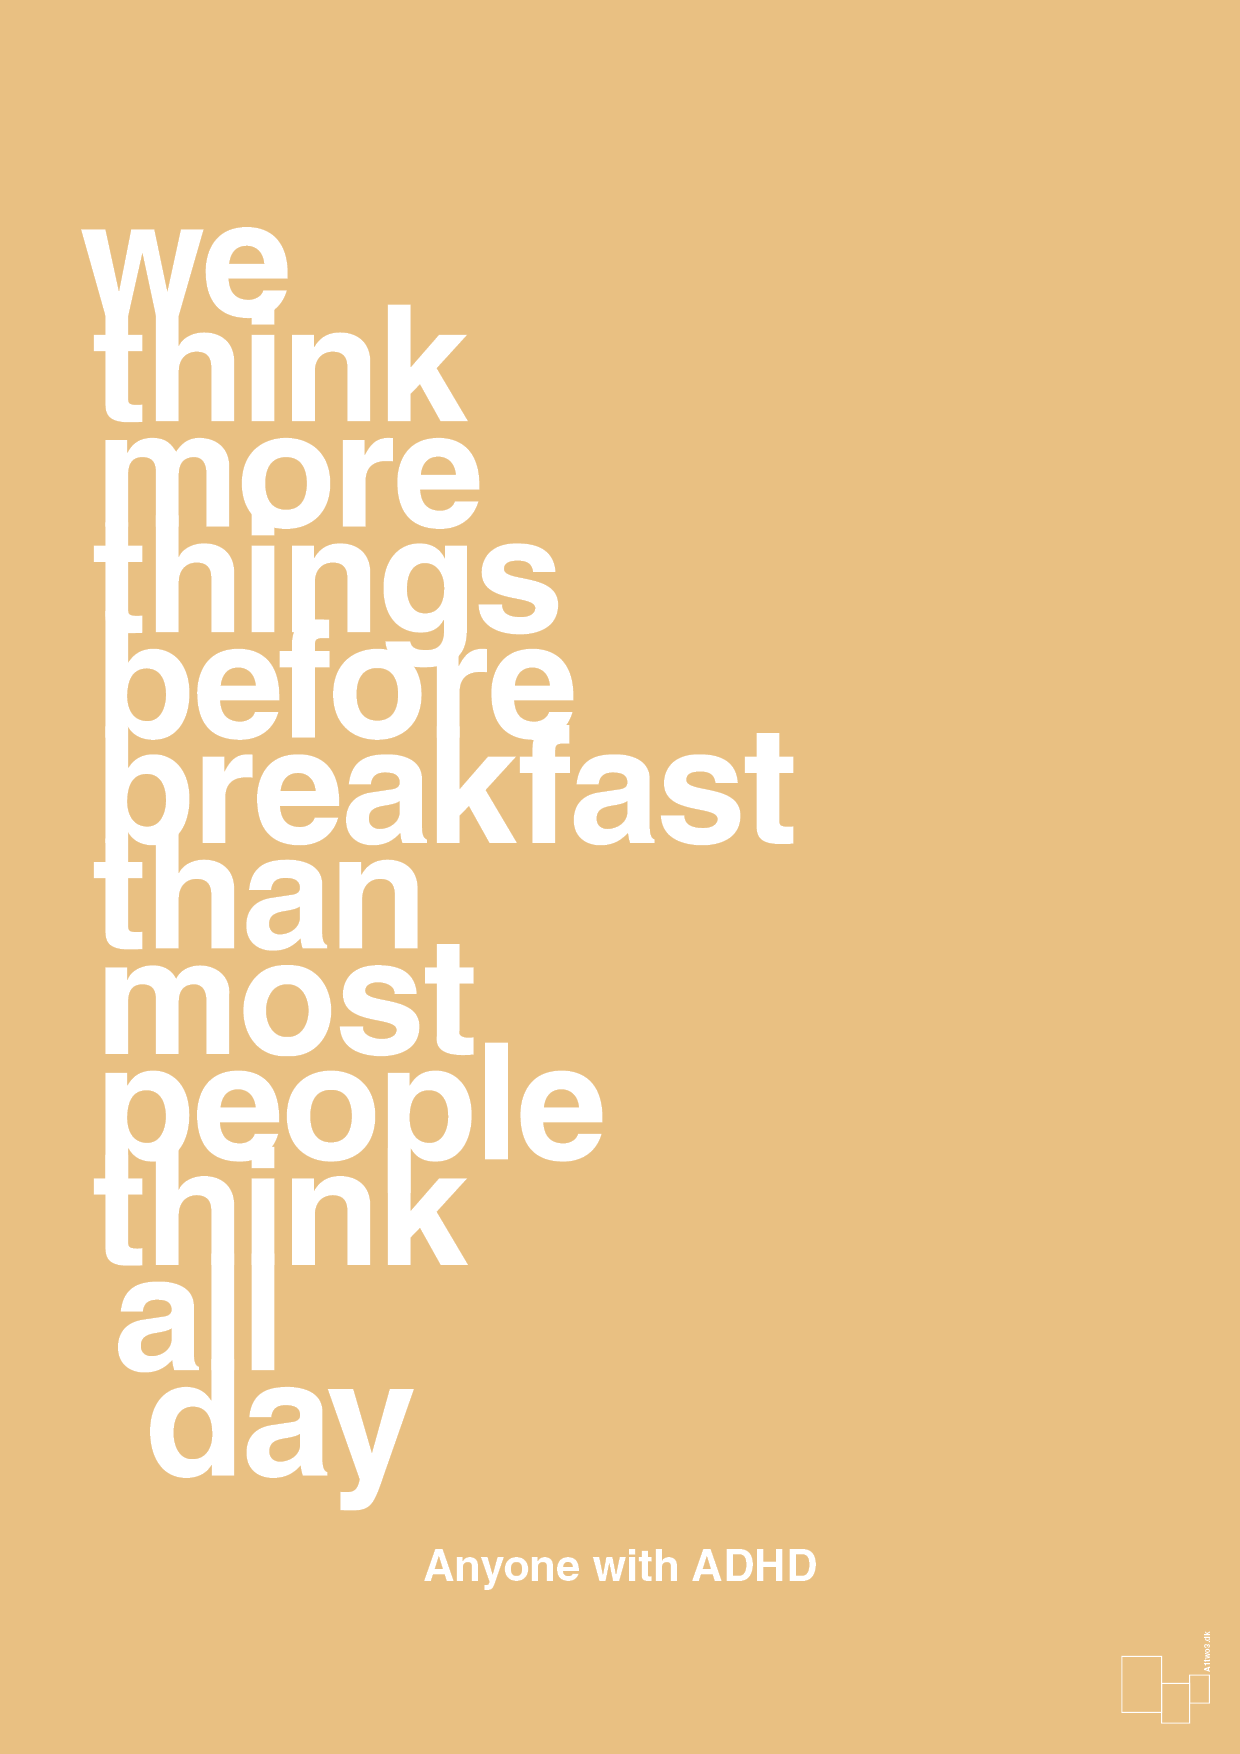 we think more things before breakfast than most people think all day - Plakat med Samfund i Charismatic